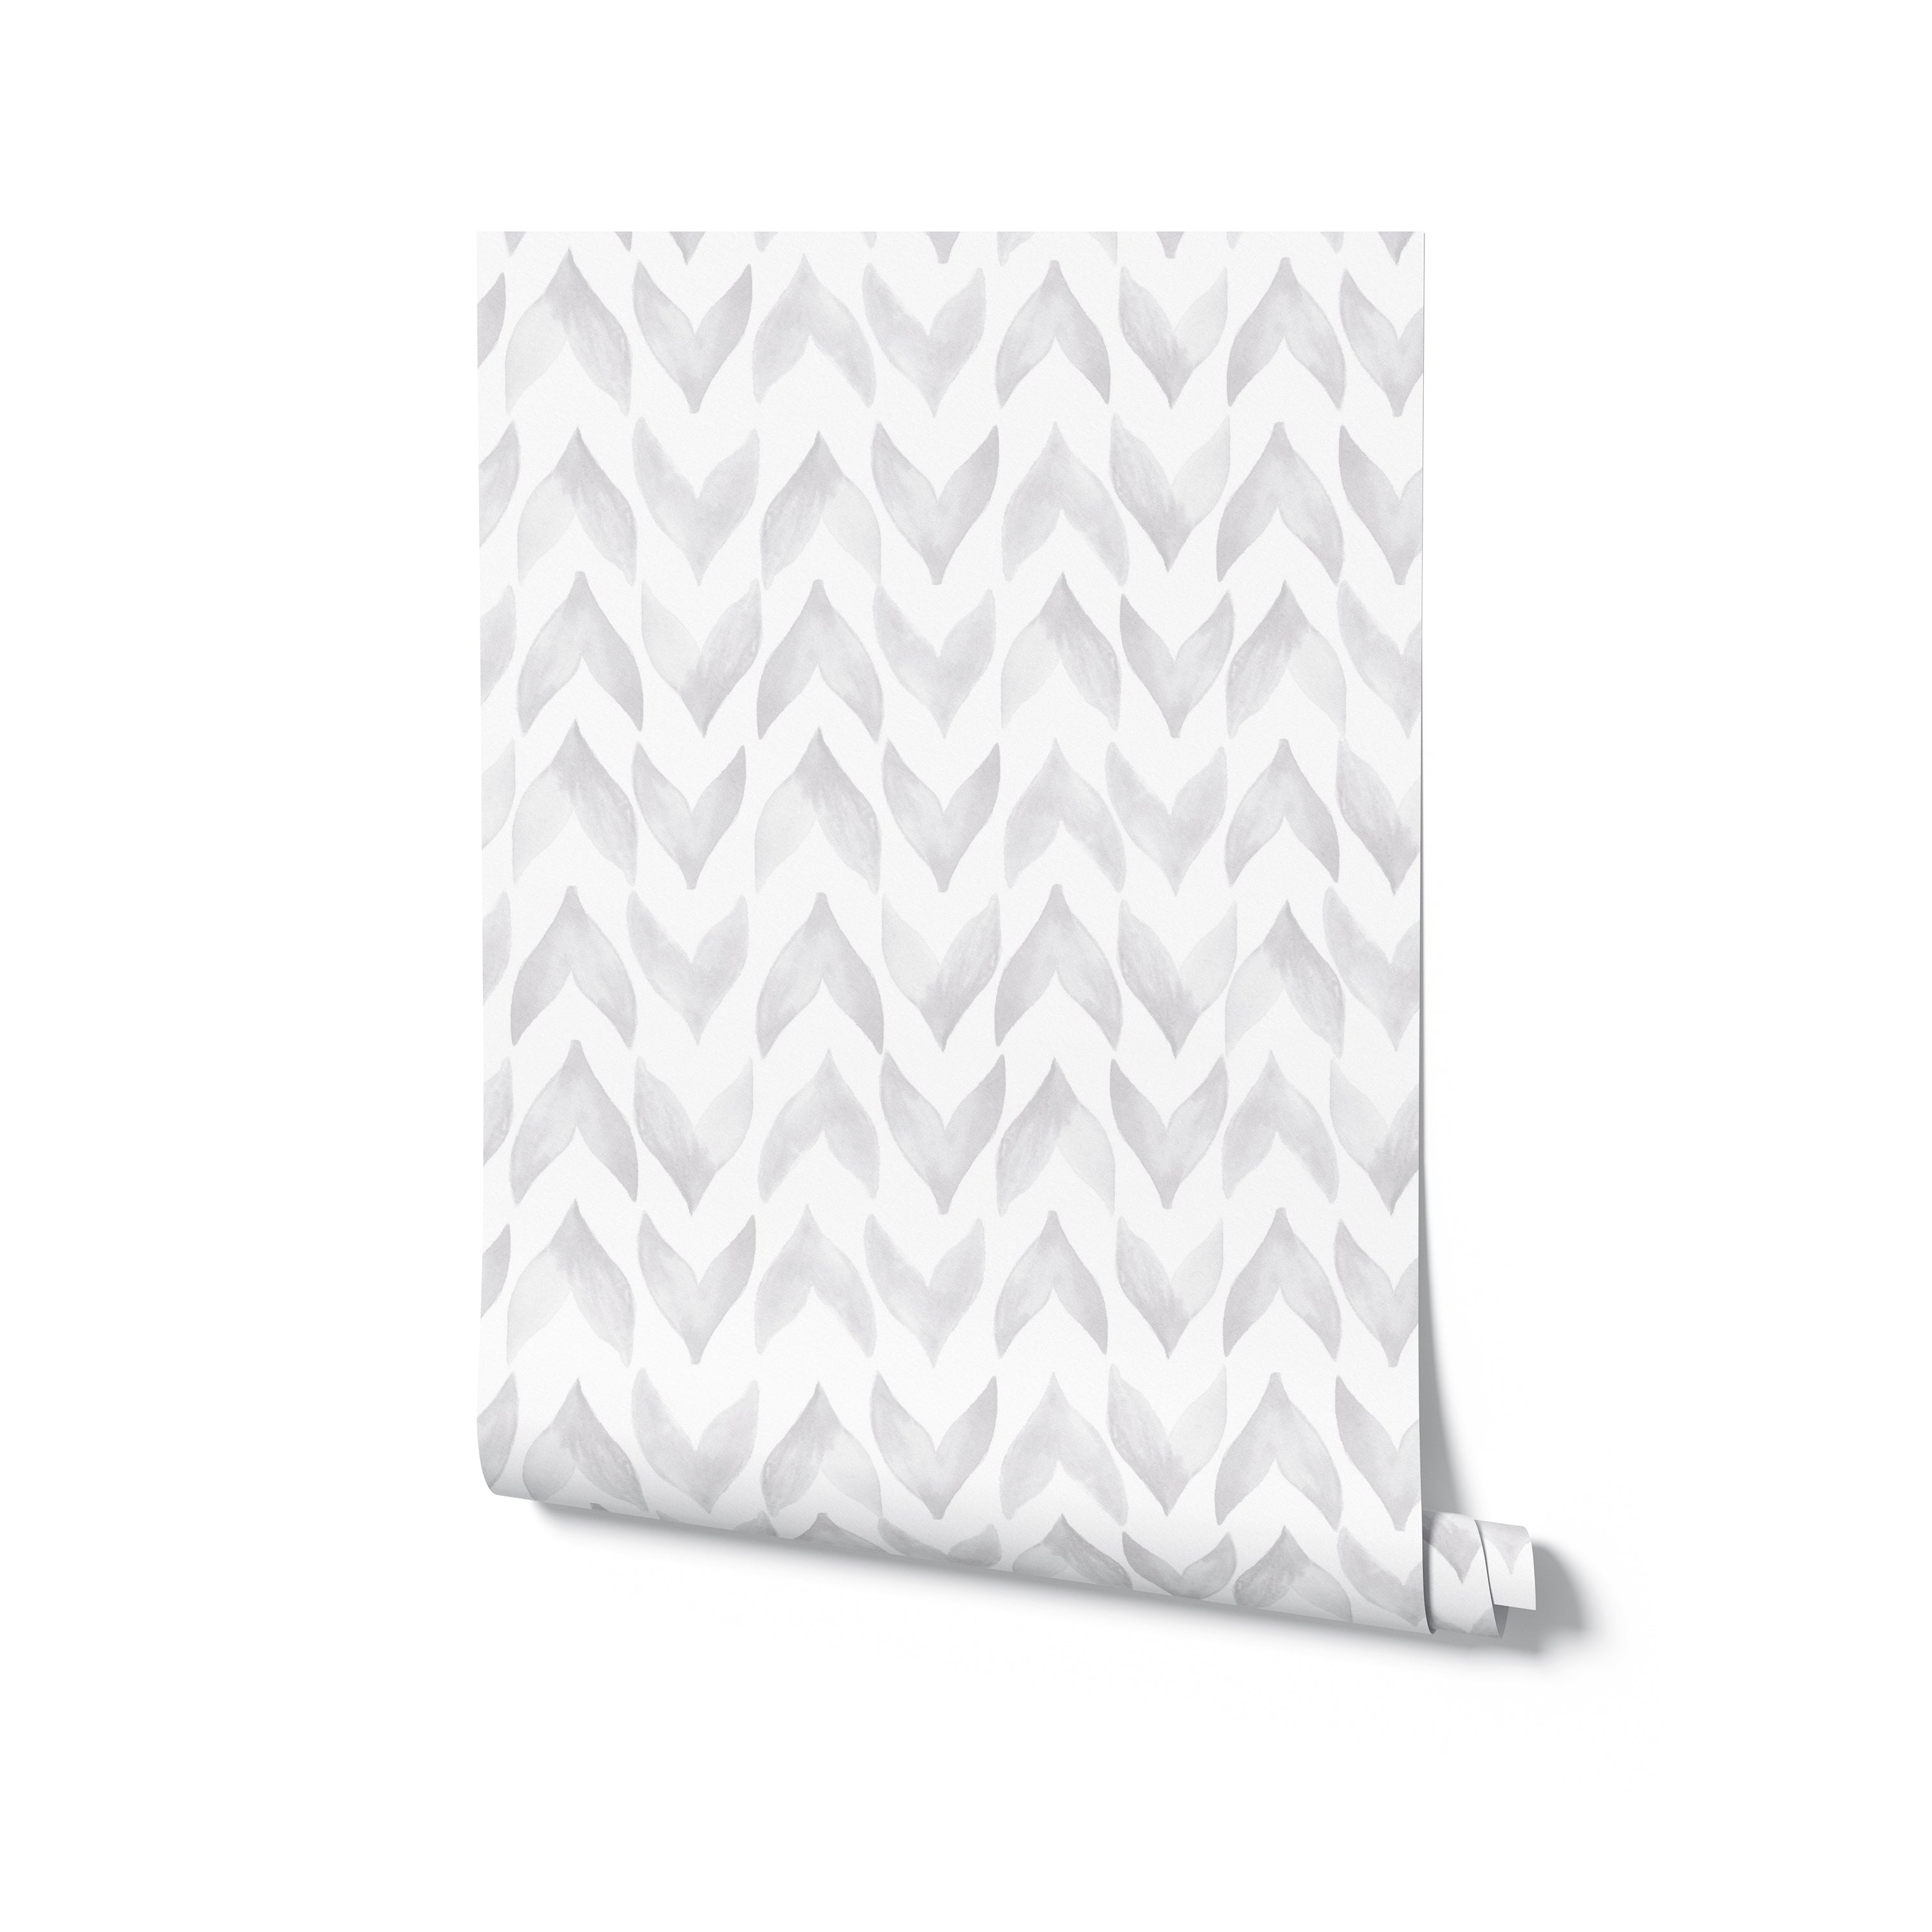 A rolled-up wallpaper sample revealing the Moroccan Tile pattern, which consists of white and light grey watercolor zigzag shapes, giving a sophisticated and contemporary feel to the design.